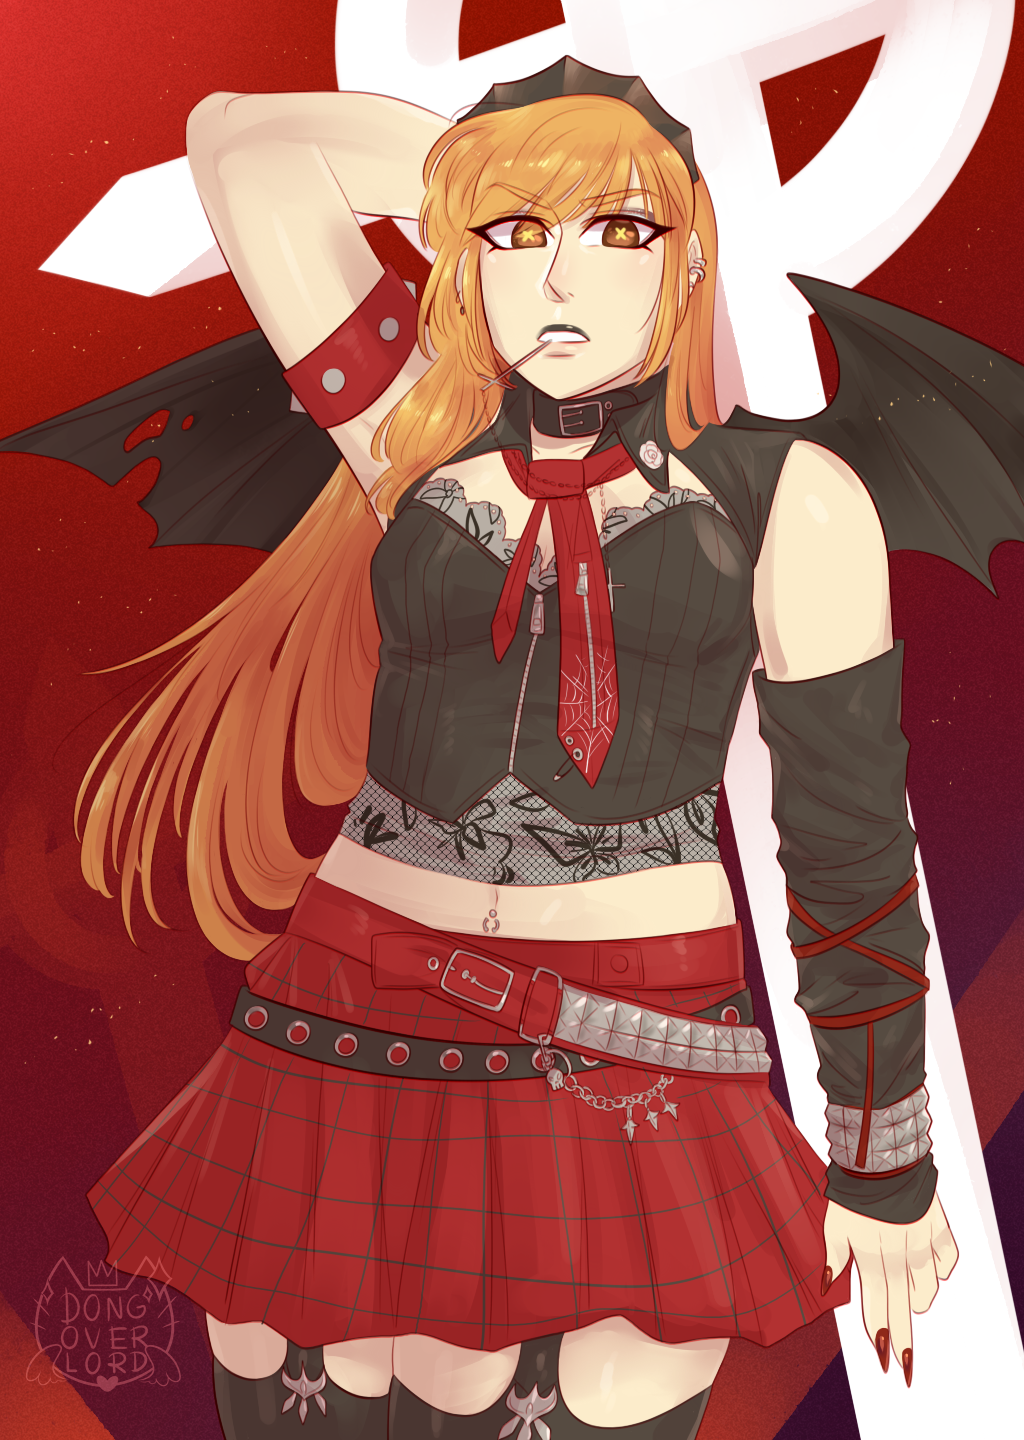 Goth Anime Angel Redraw by dongoverlord on DeviantArt